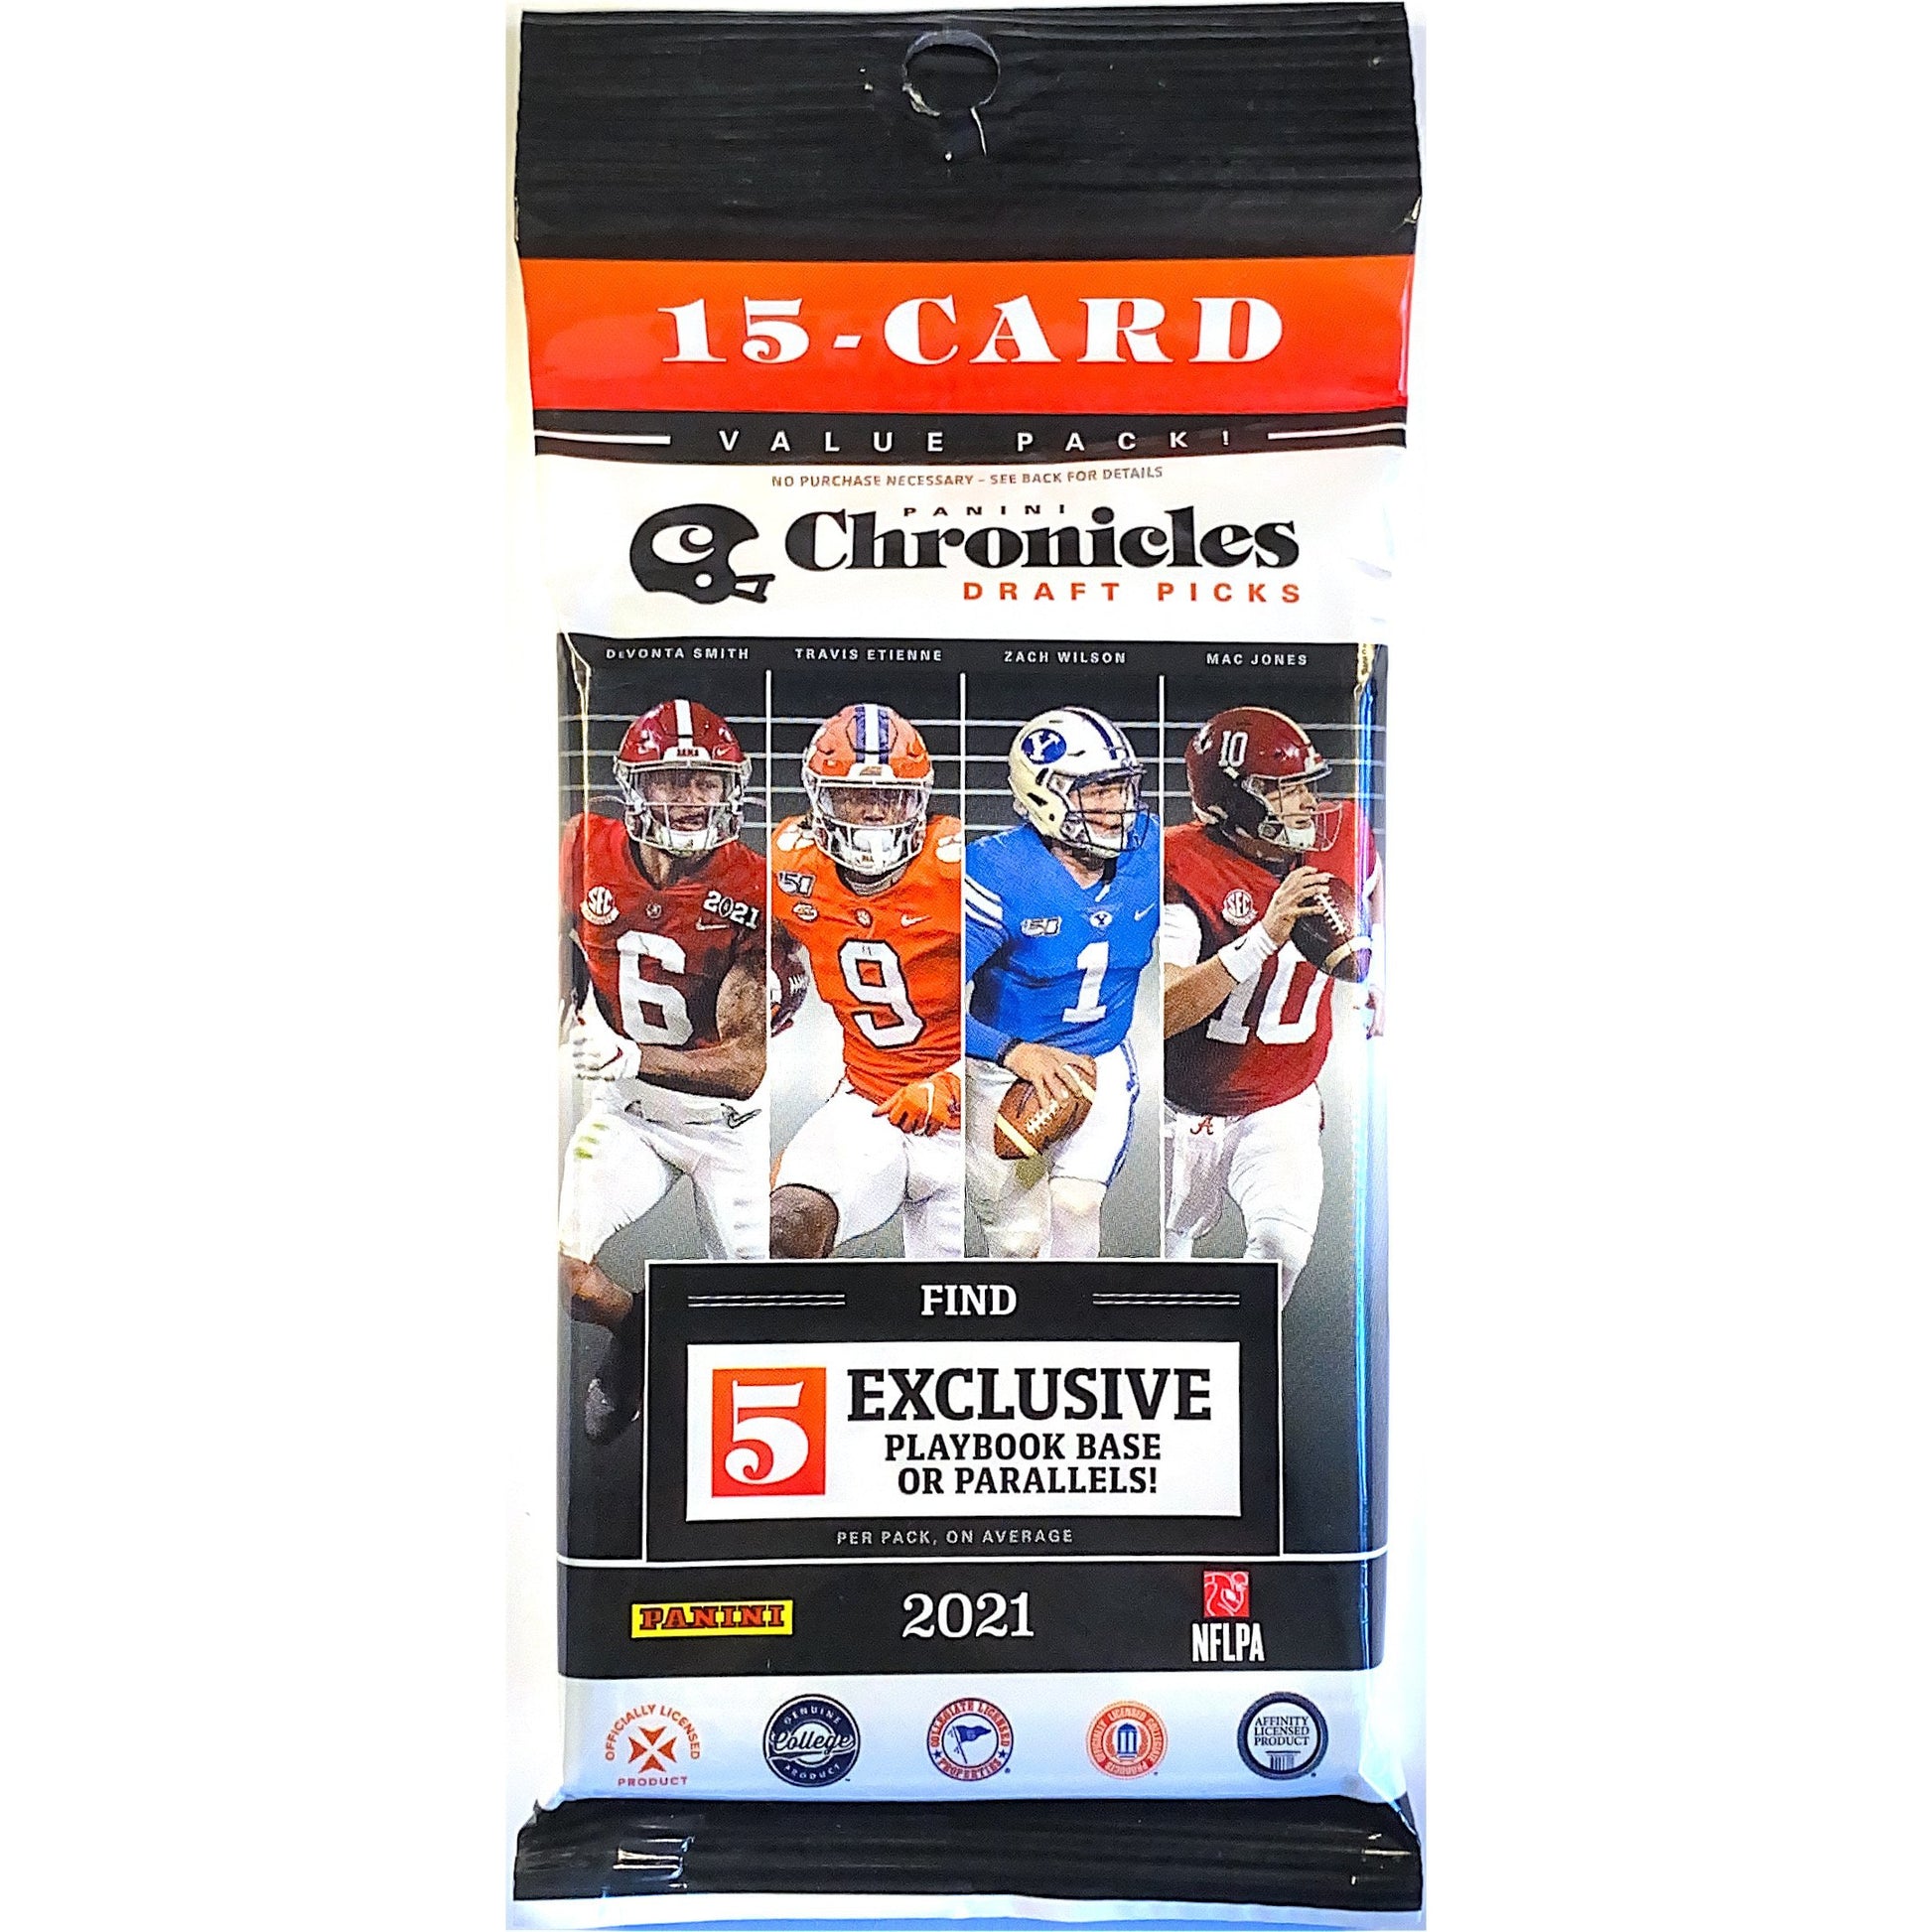  2021 Panini NFL Chronicles Football Draft Picks Cello Pack  Local Legends Cards & Collectibles